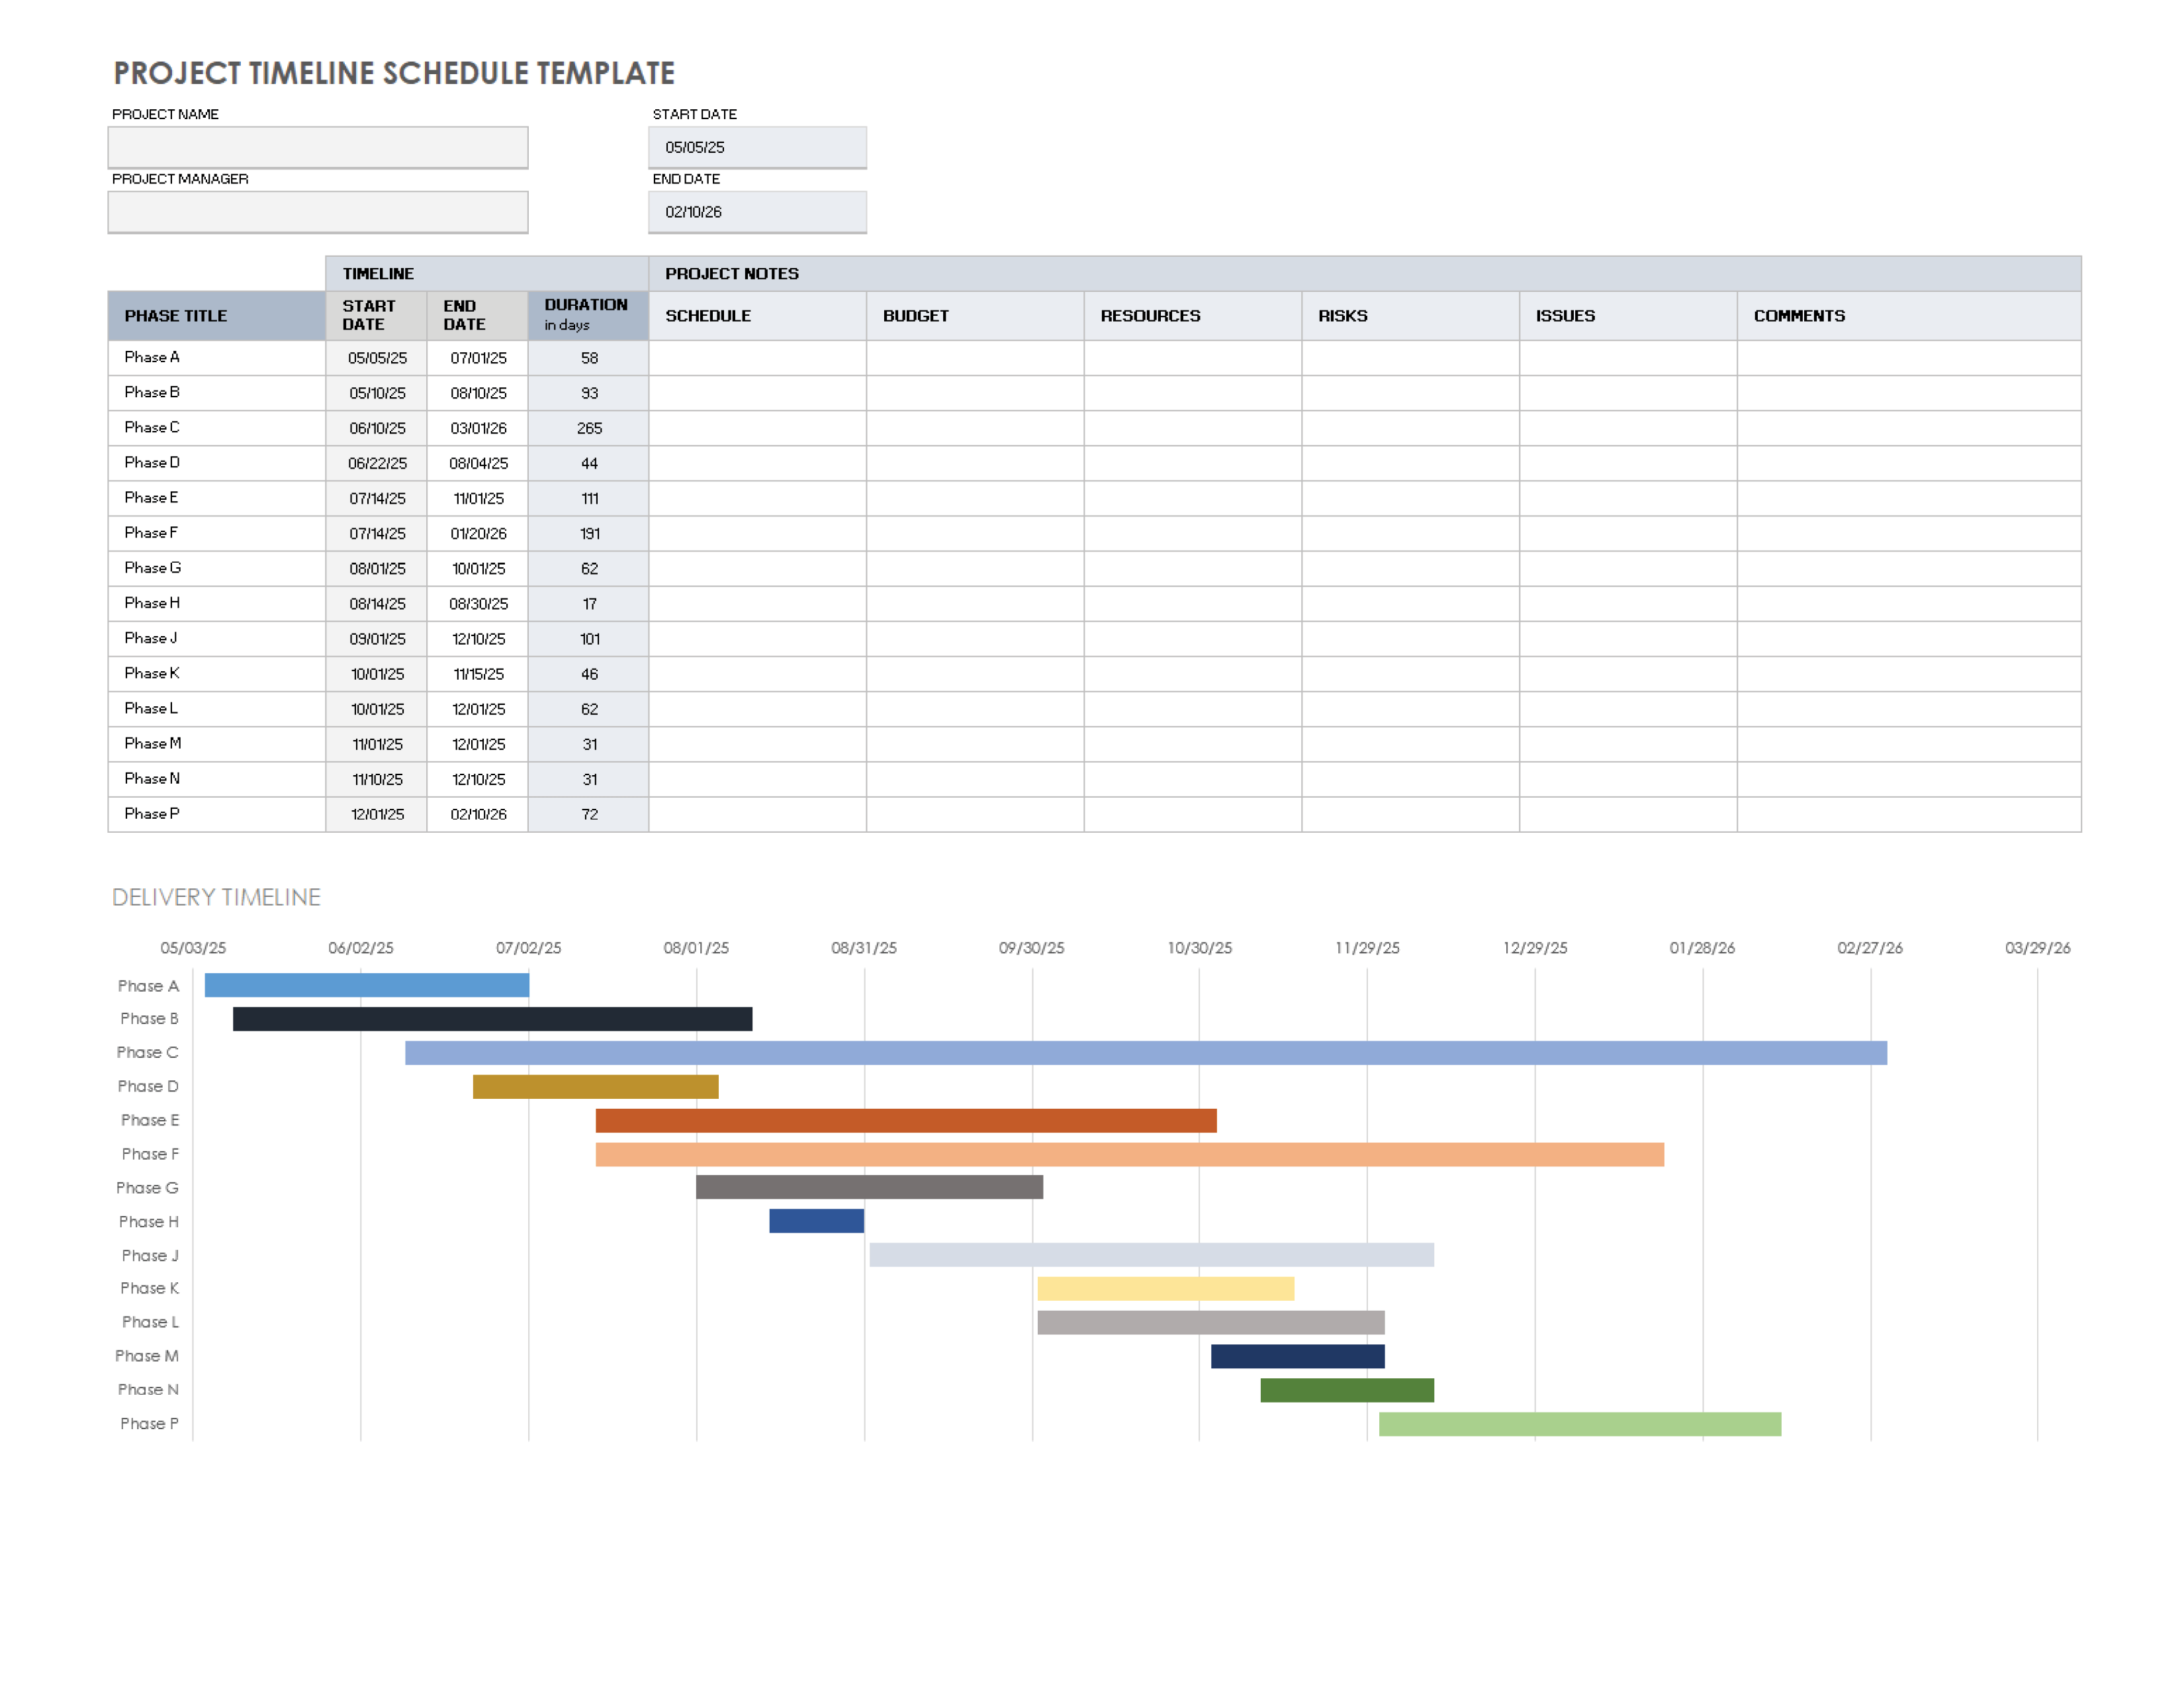 Project Timeline Schedule Template